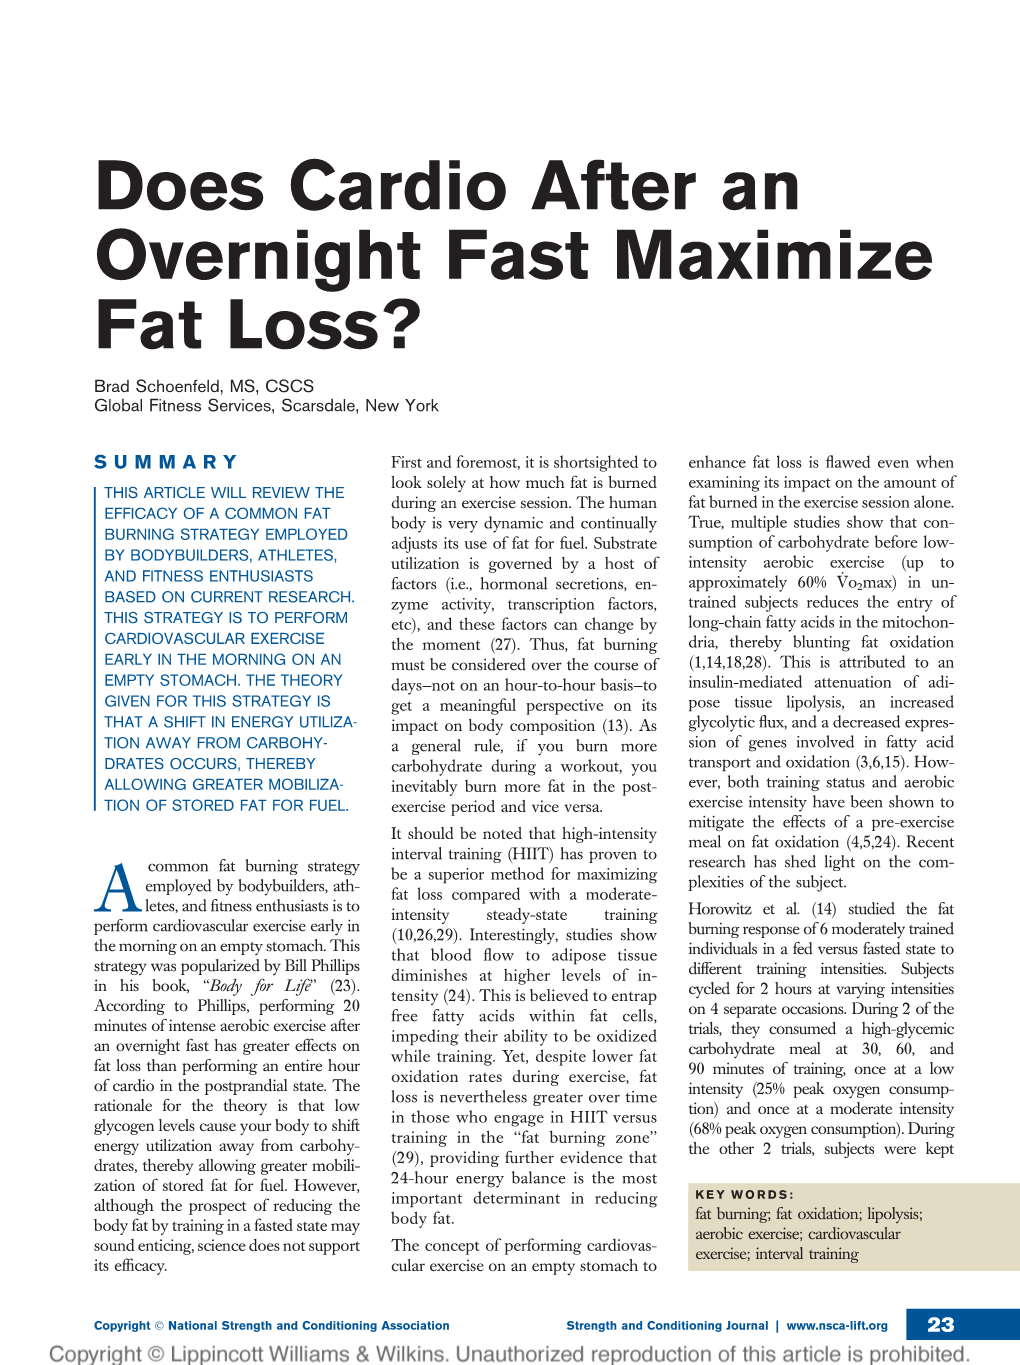 Does Cardio After an Overnight Fast Maximize Fat Loss? Brad Schoenfeld, MS, CSCS Global Fitness Services, Scarsdale, New York